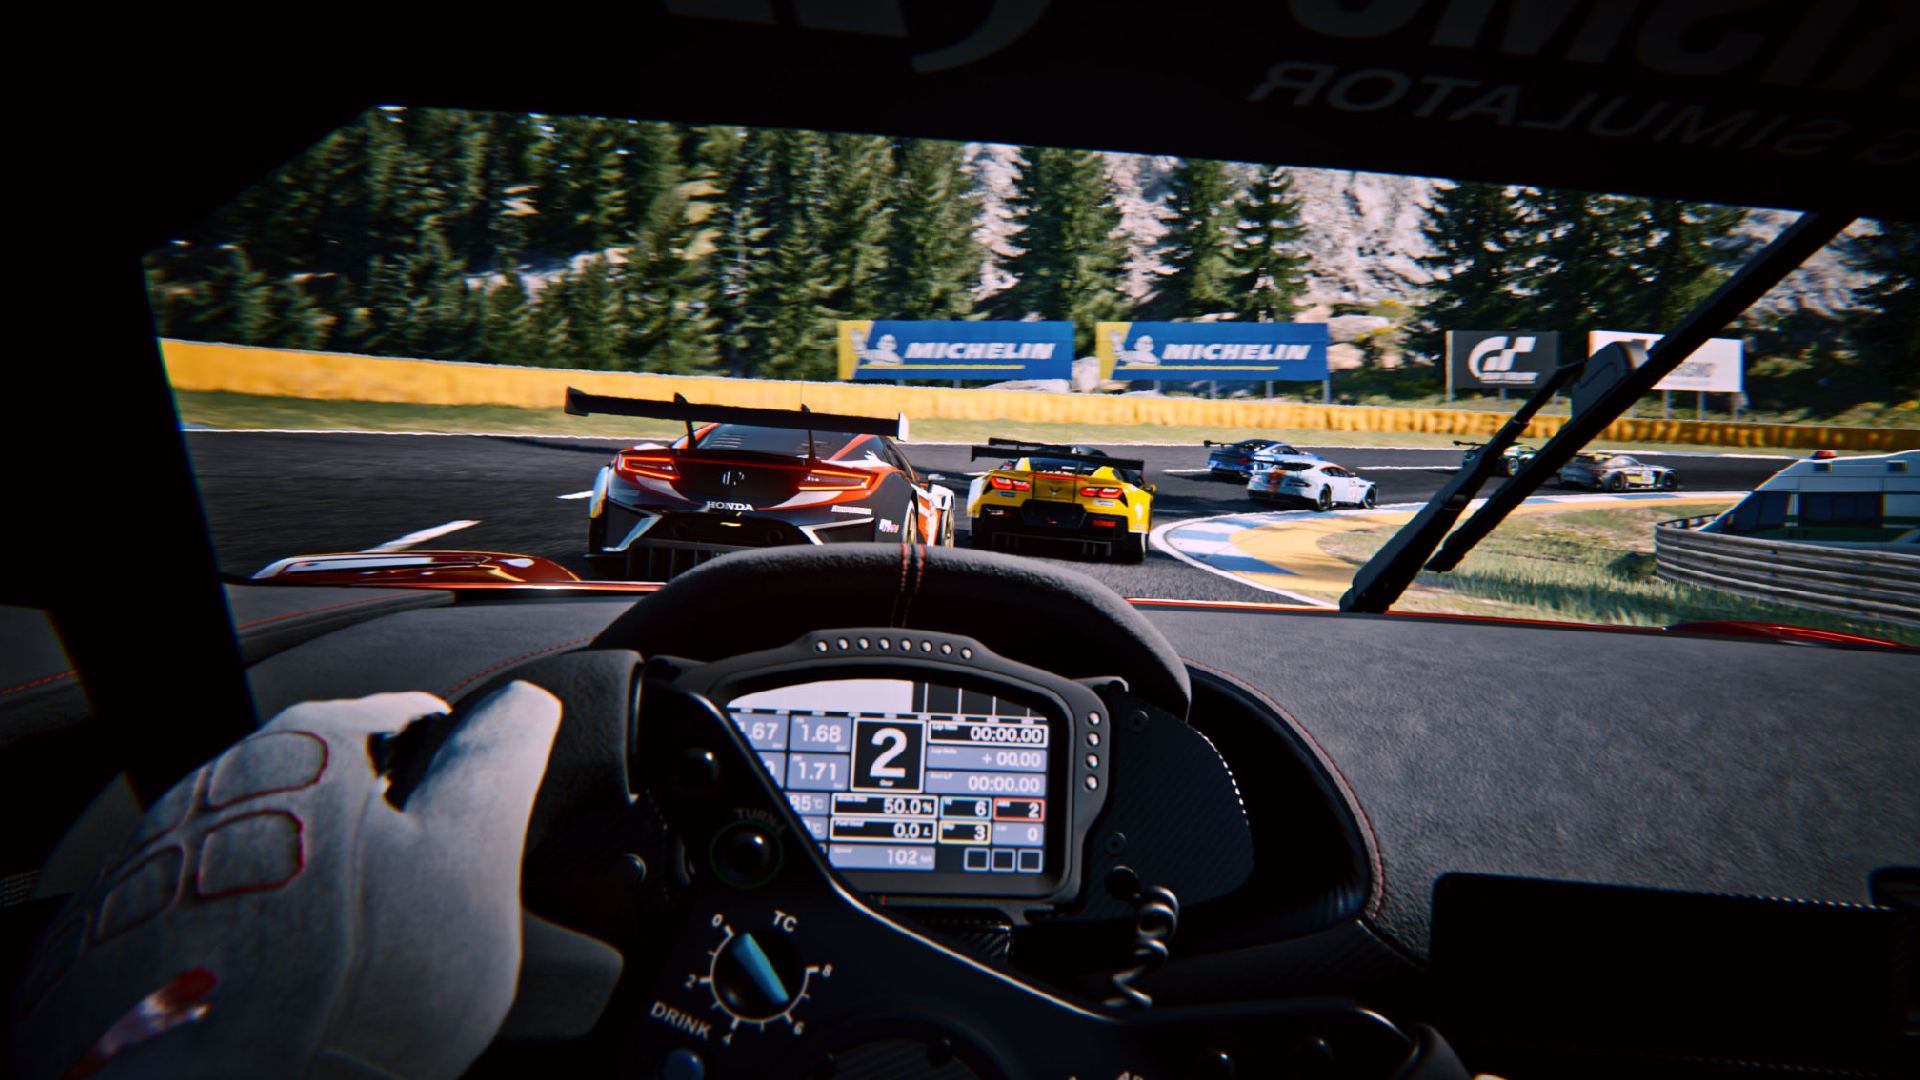 Ocean Kritisk peddling Gran Turismo 7 split-screen – can you play locally? | The Loadout